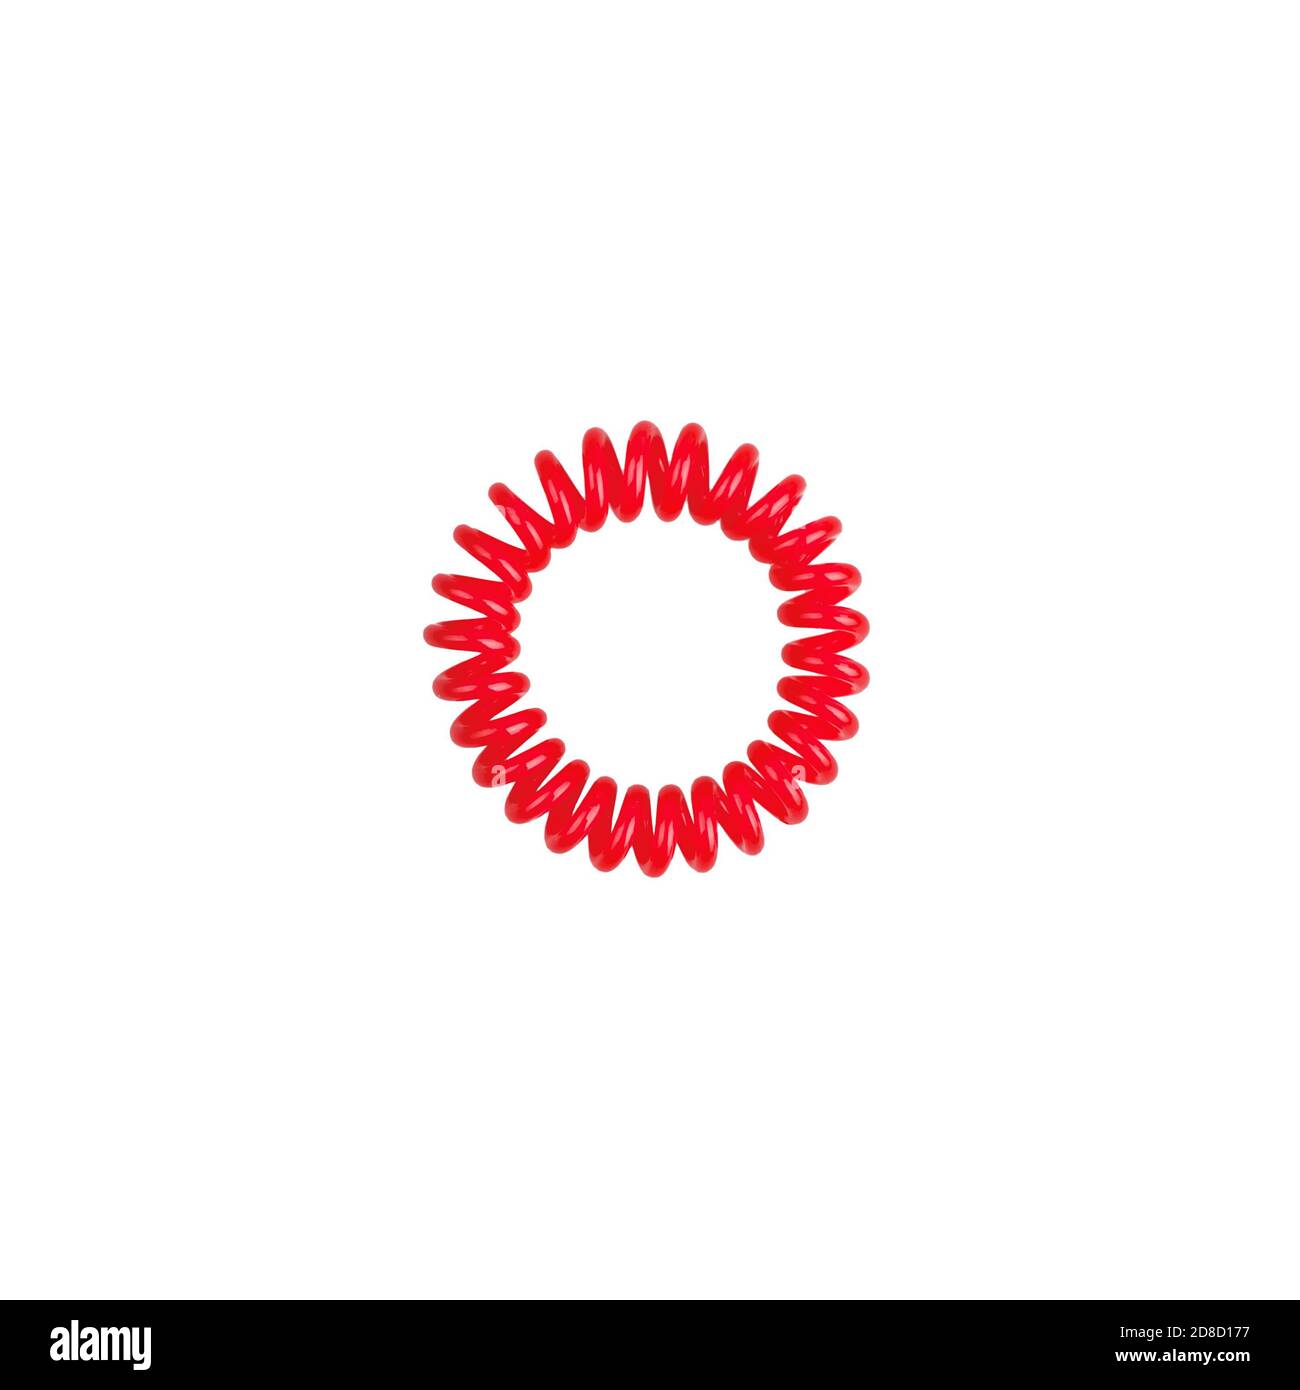 Red scrunchy on white background isolated closeup, spiral elastic scrunchie, circle flexible plastic hair band, one round rubber barrette, hairstyle Stock Photo